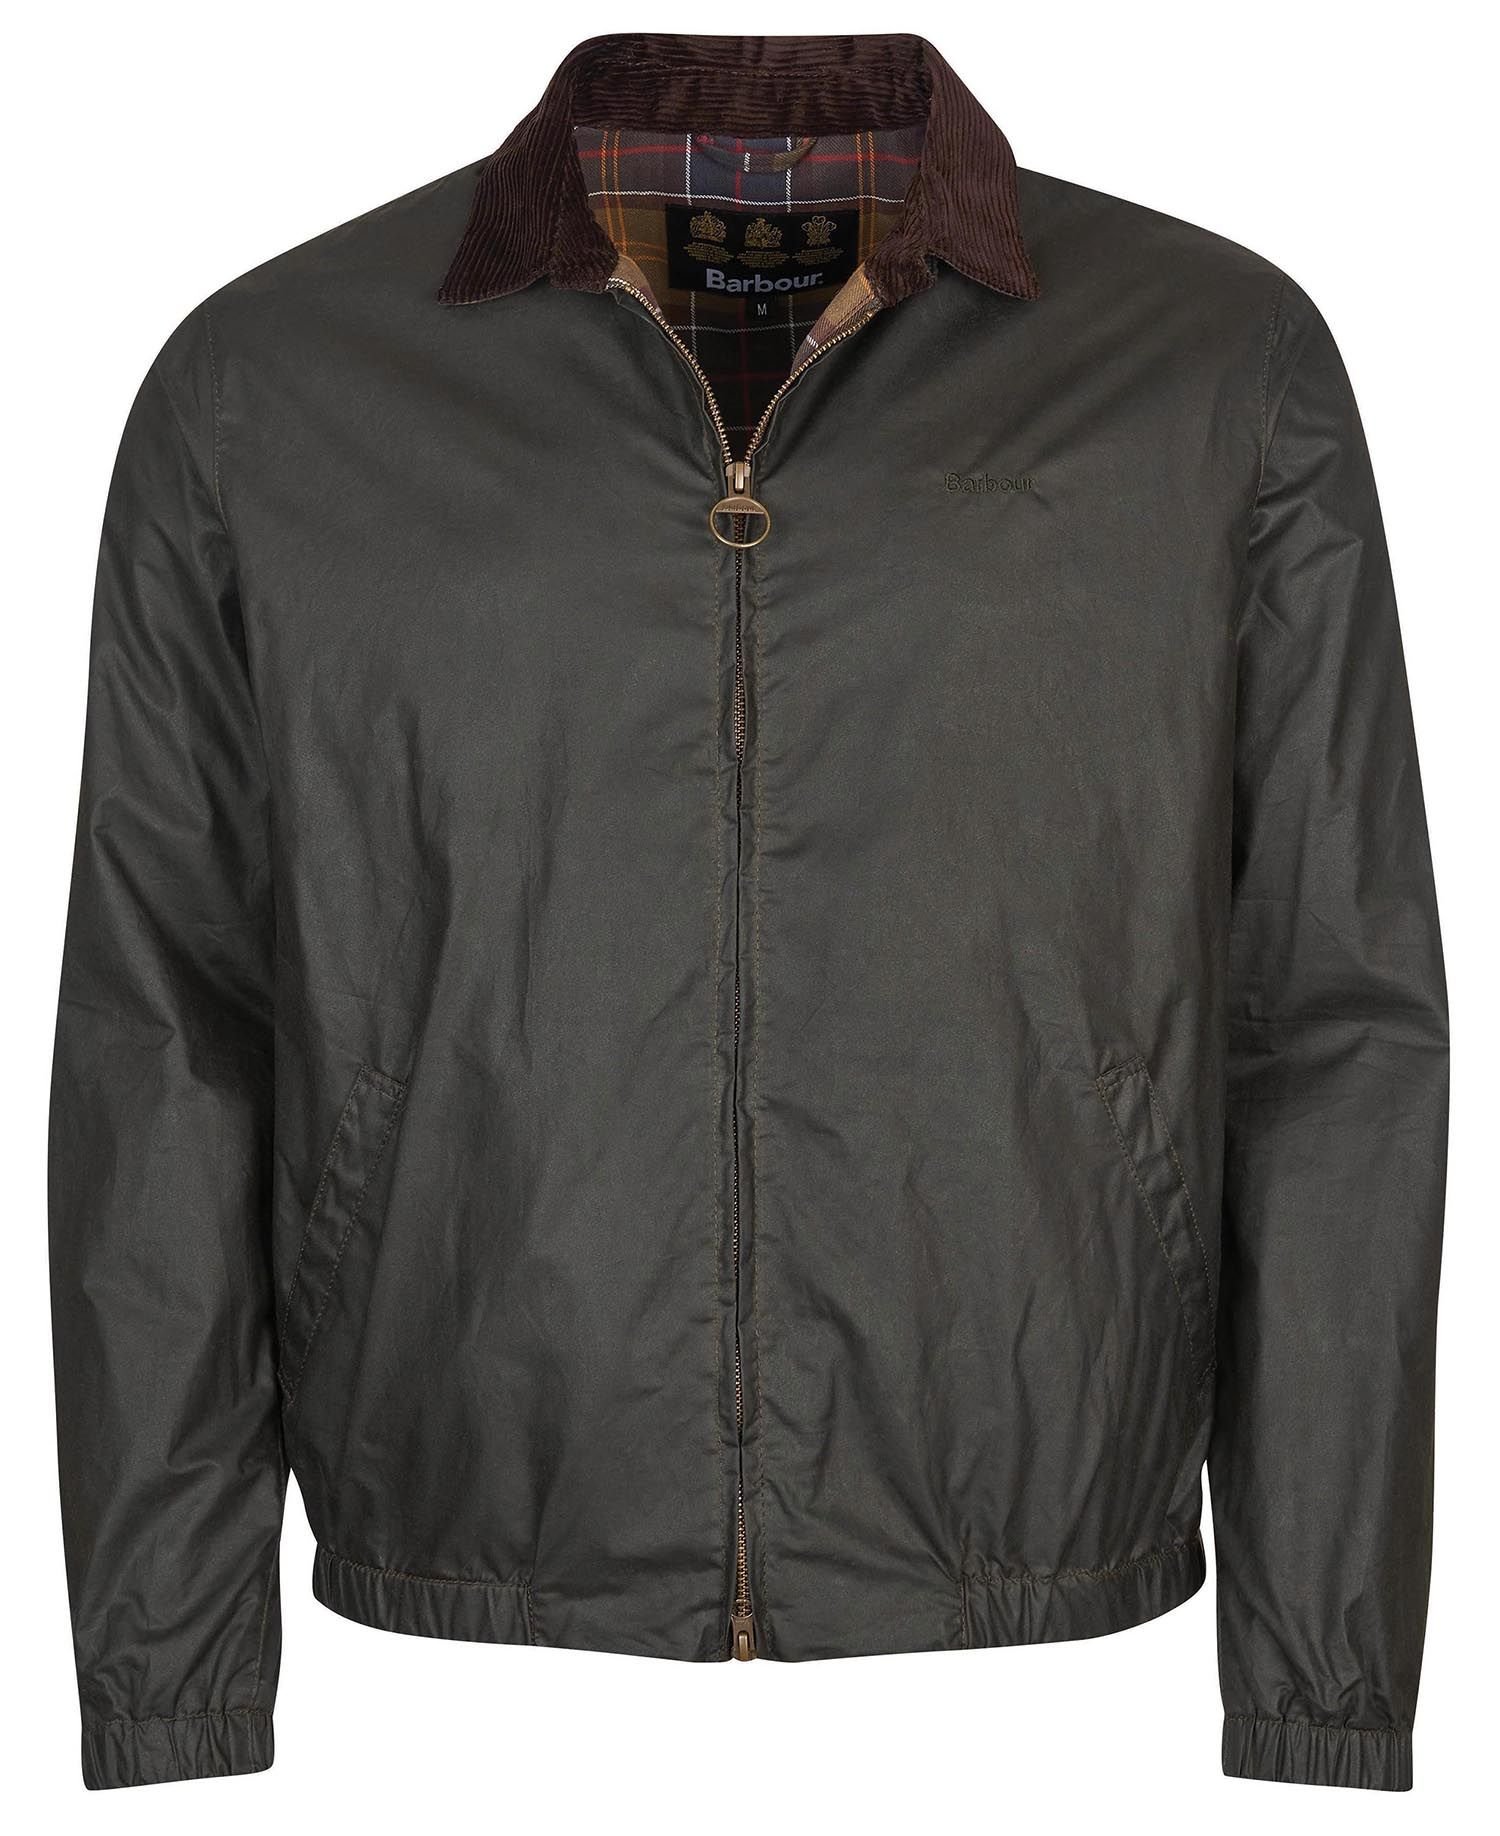 BARBOUR Vital Waxed Jacket in Black/Classic | Endource